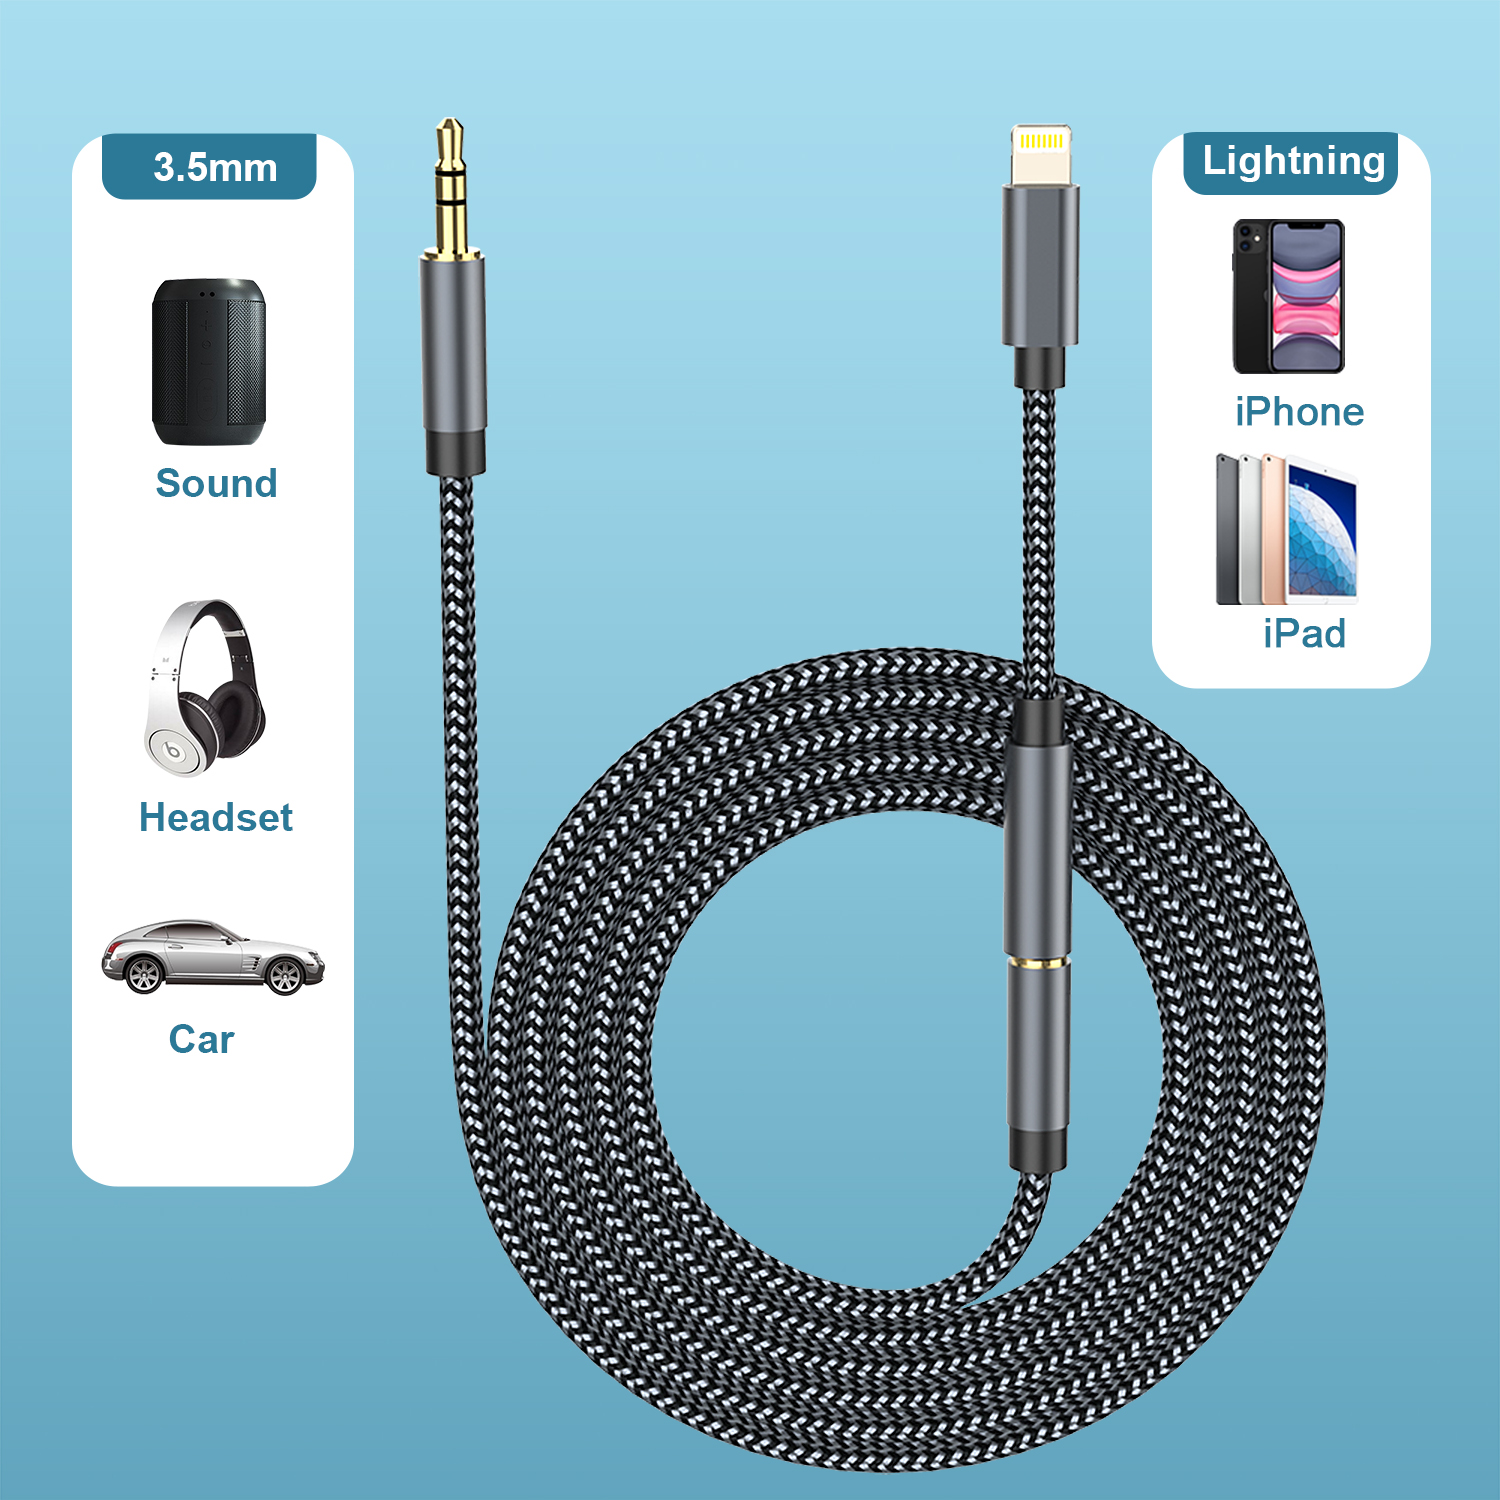 IPhone AUX CABLE